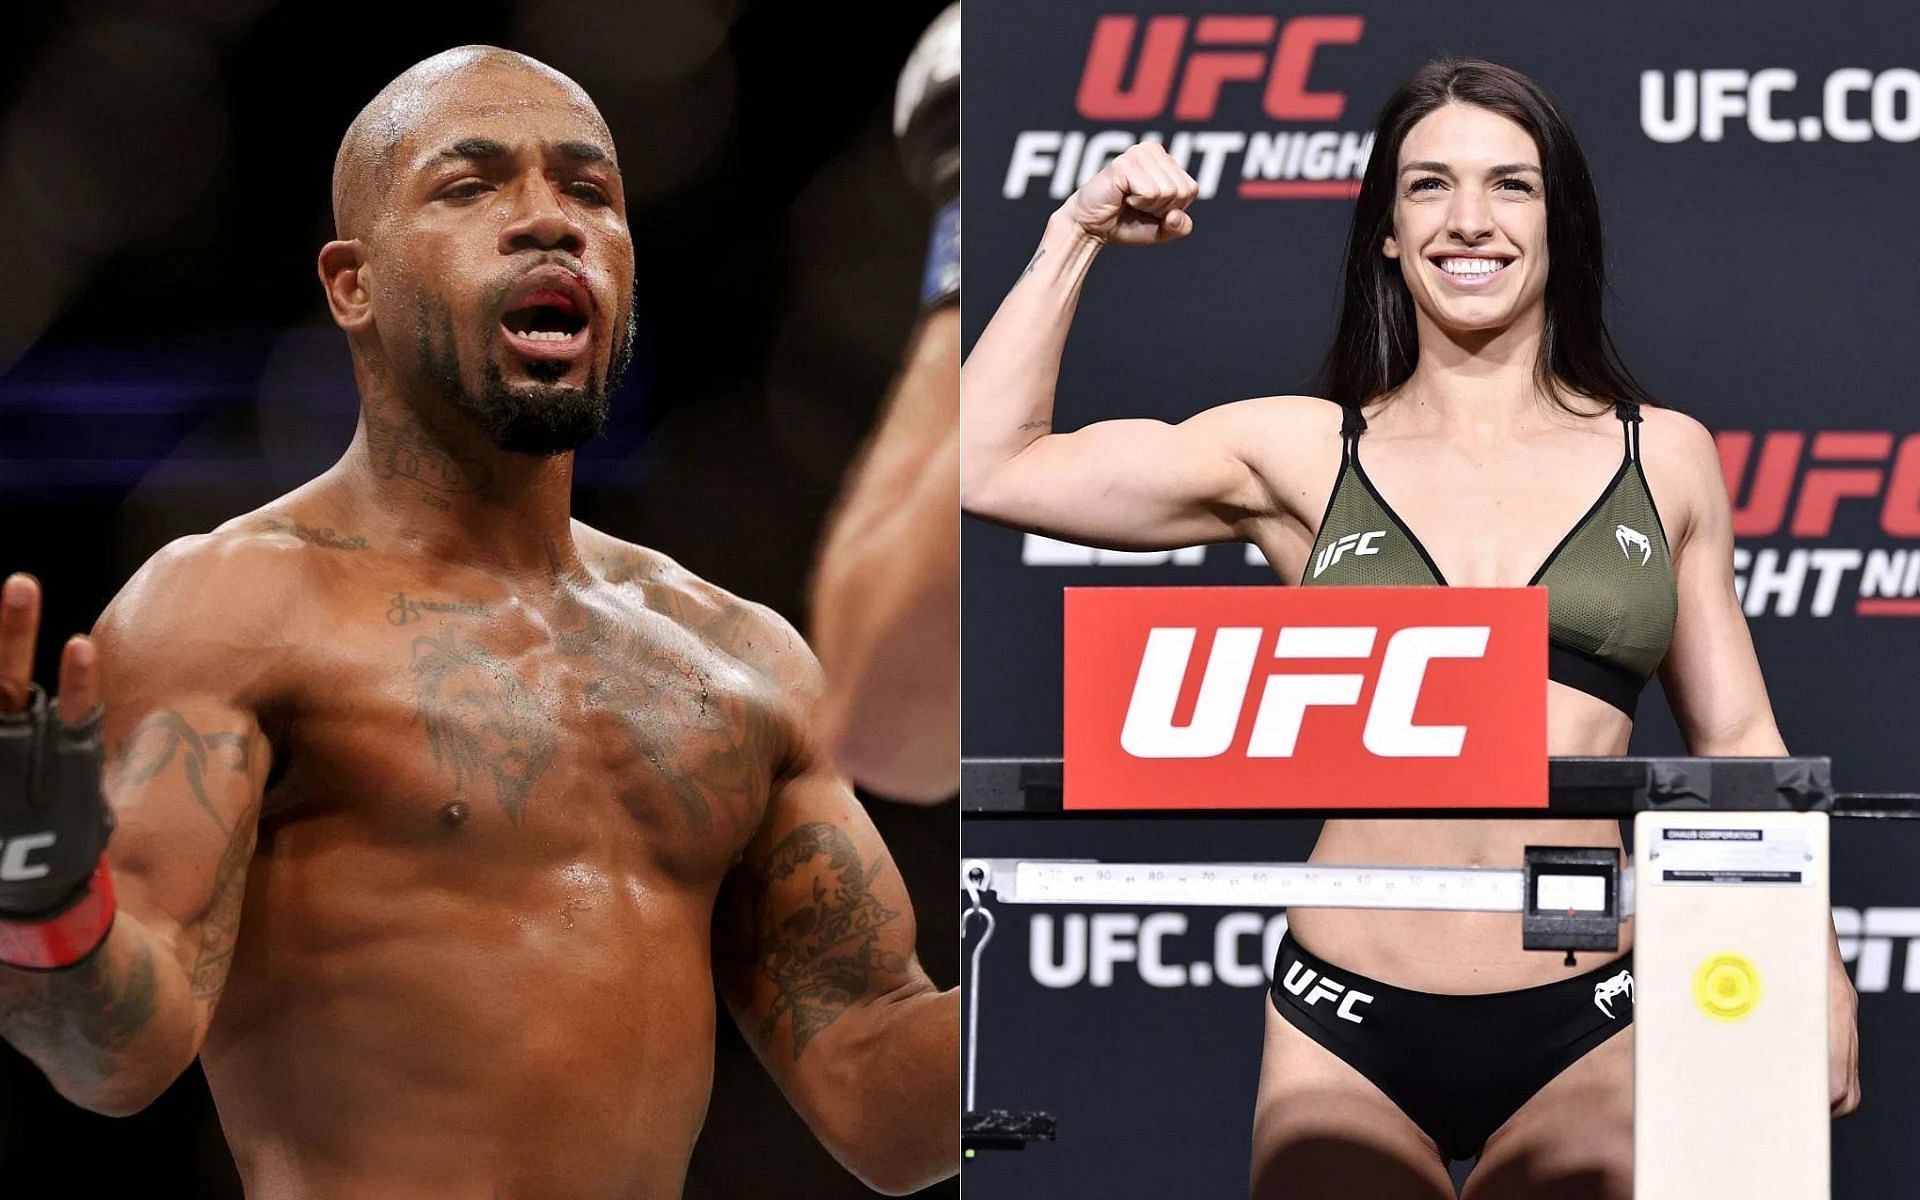 Bobby Green (left) speaks about an interaction with Mackenzie Dern